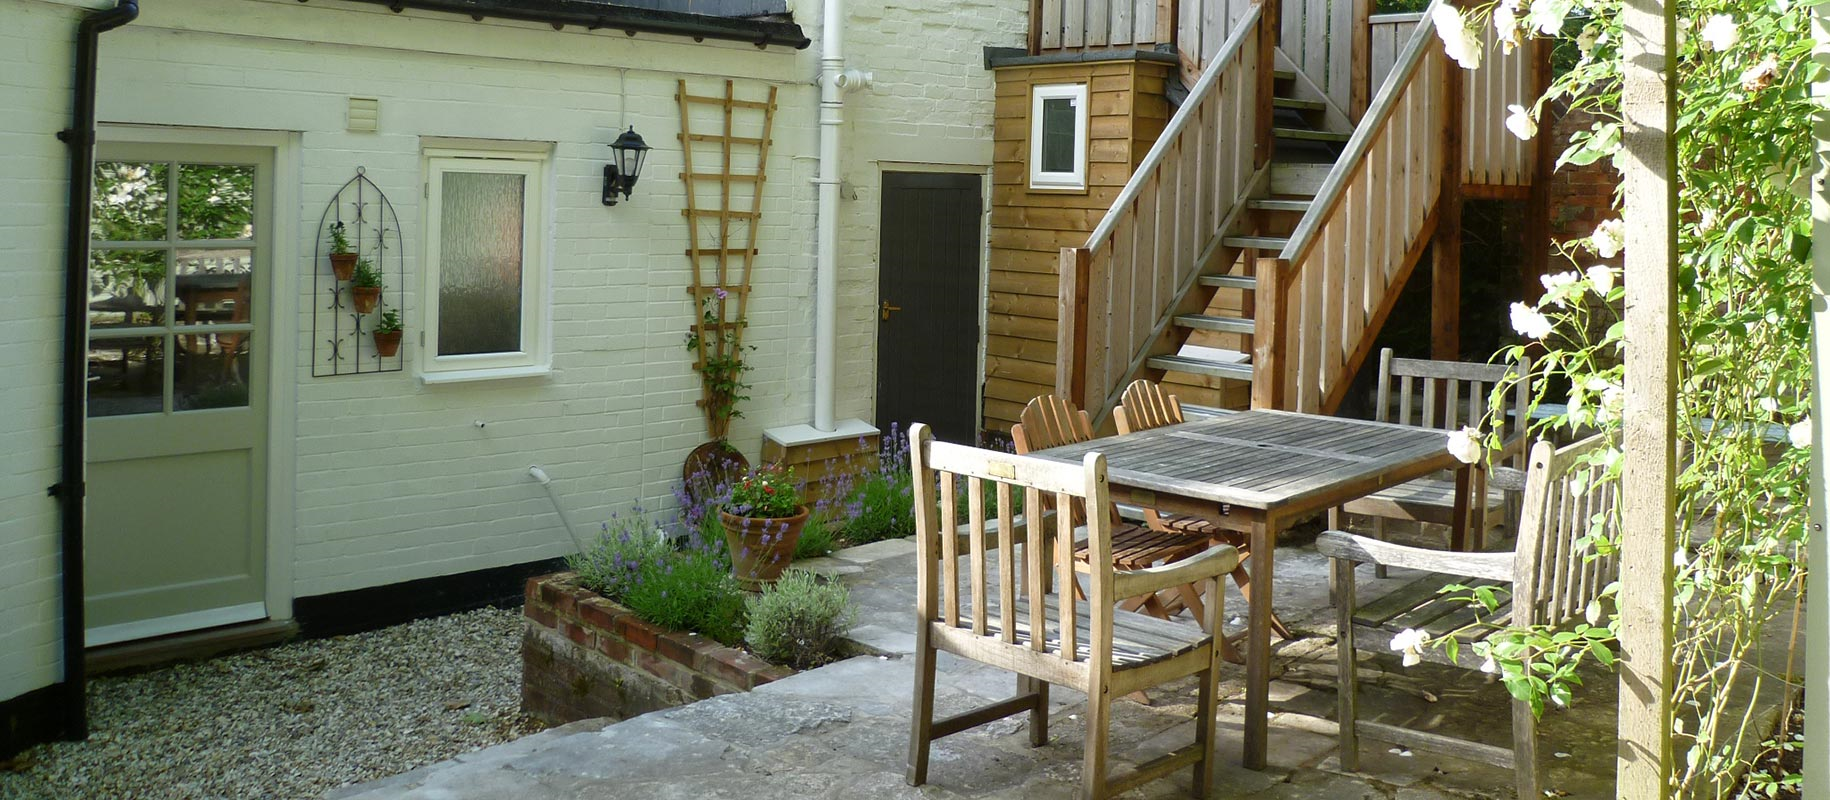 Holiday Rental in Milford on Sea